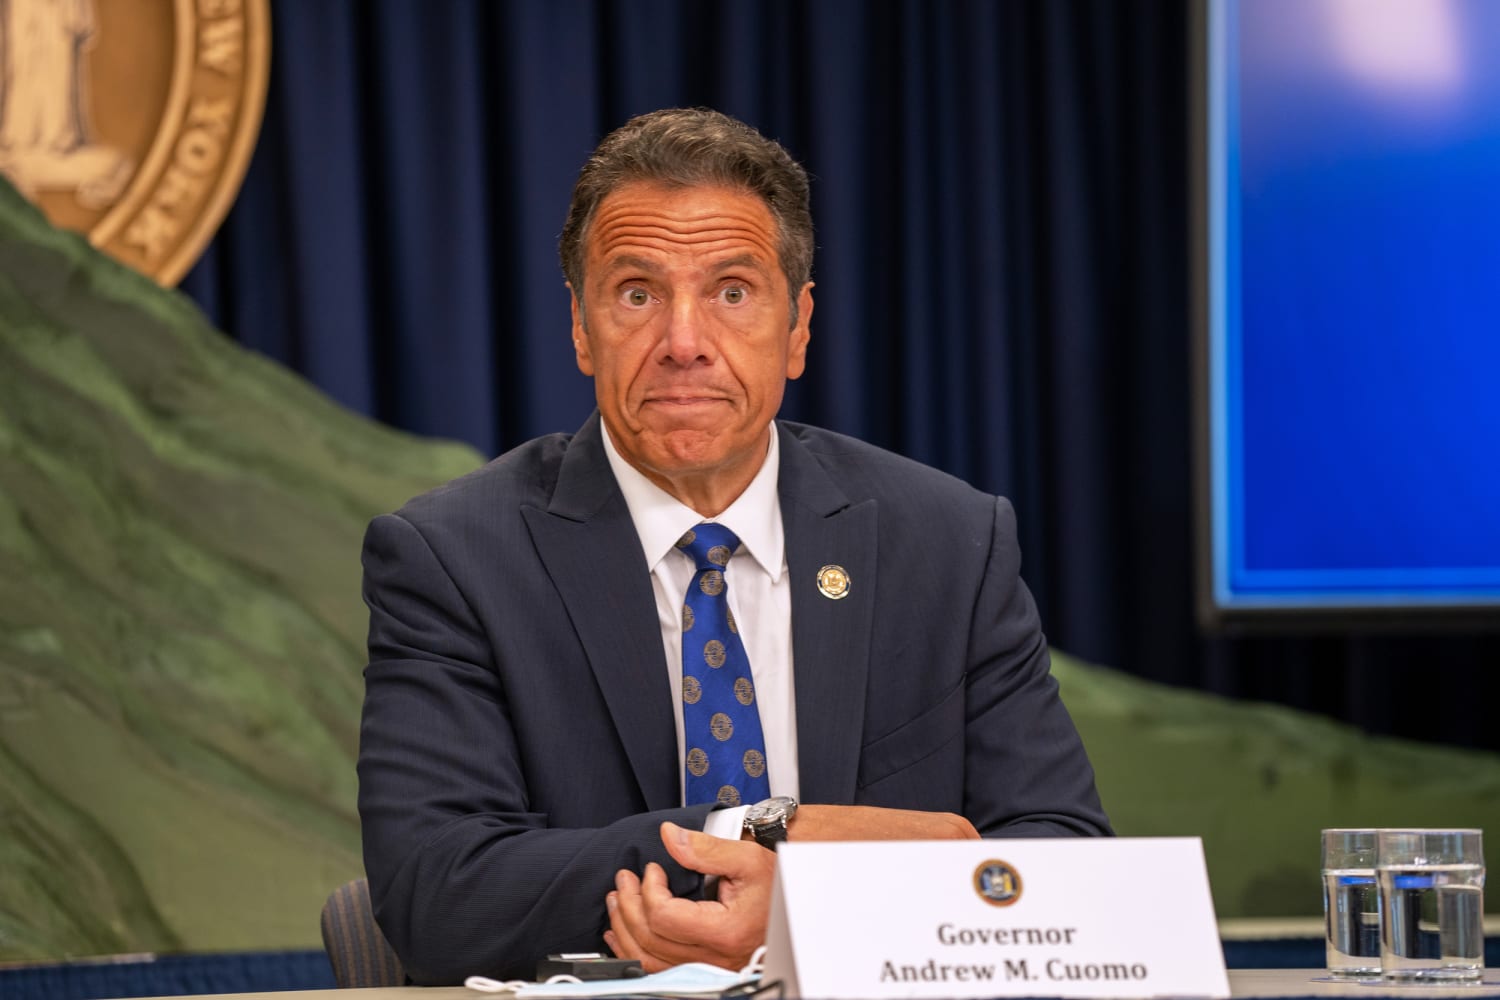 Former Adviser To Gov Andrew Cuomo Alleges He Sexually Harassed Her For Years